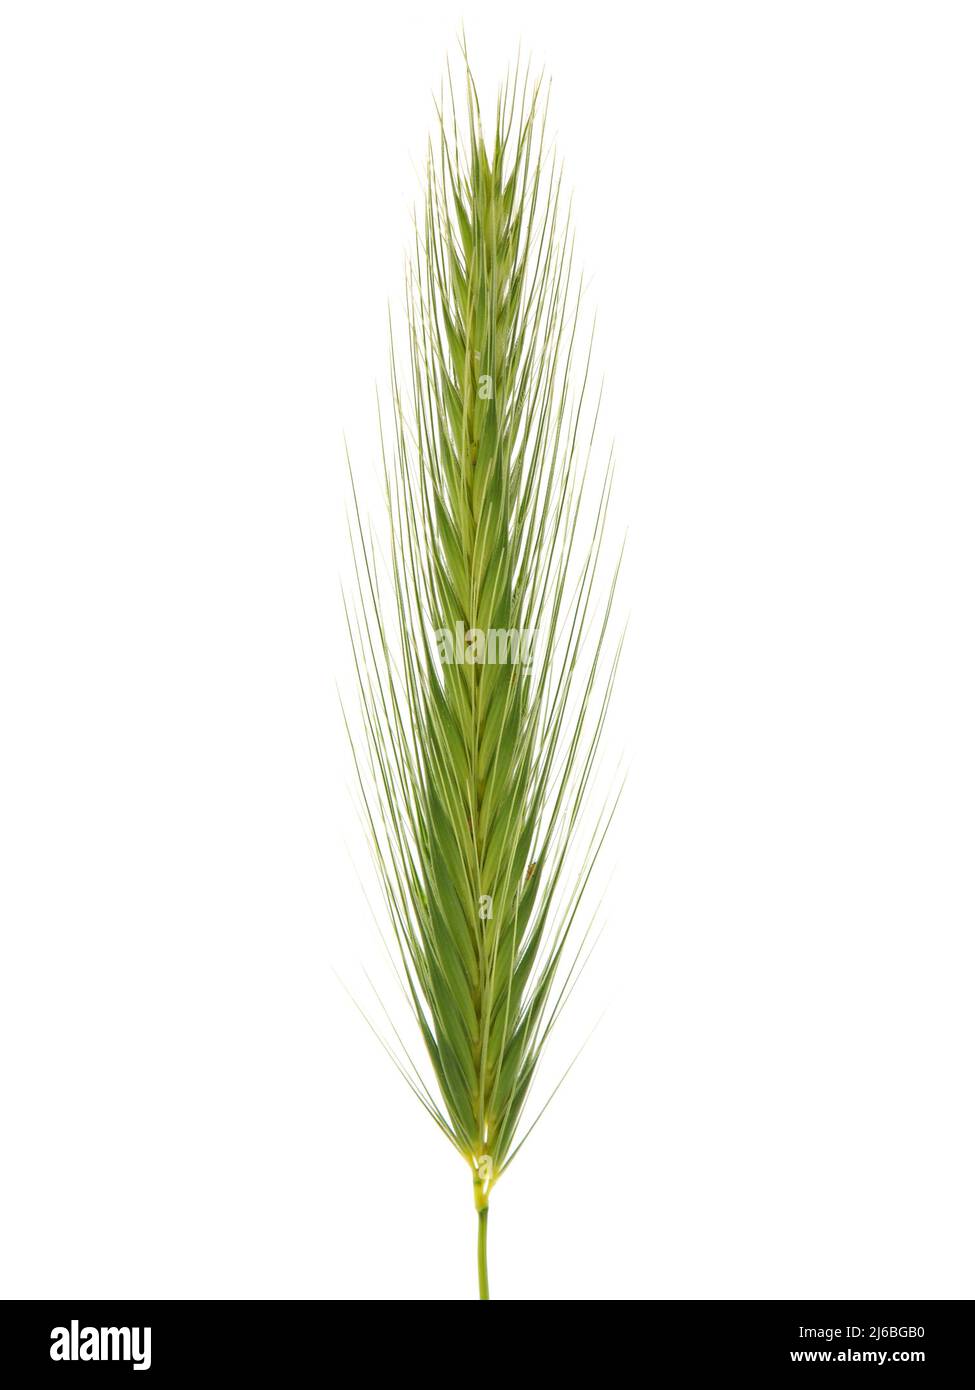 Green spike of grass isolated on white background Stock Photo